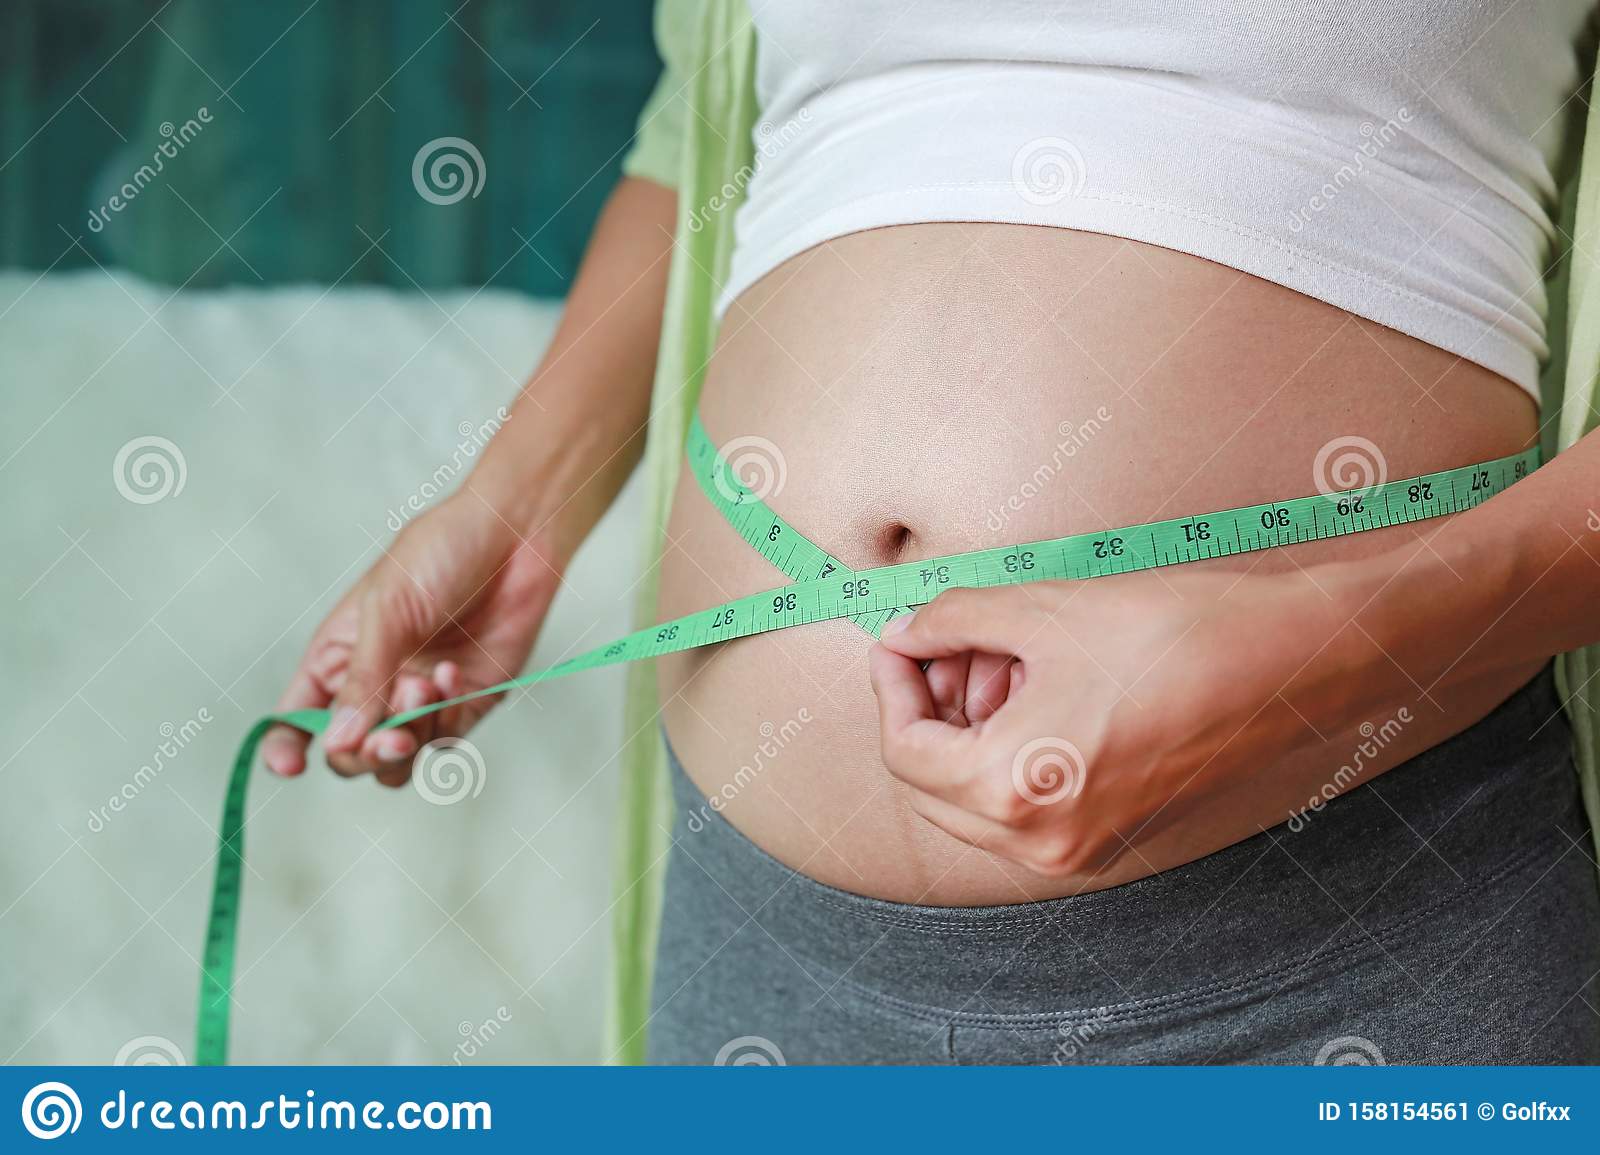 Pregnant Woman Measuring Her Belly With Tape Measure Stock Image ...